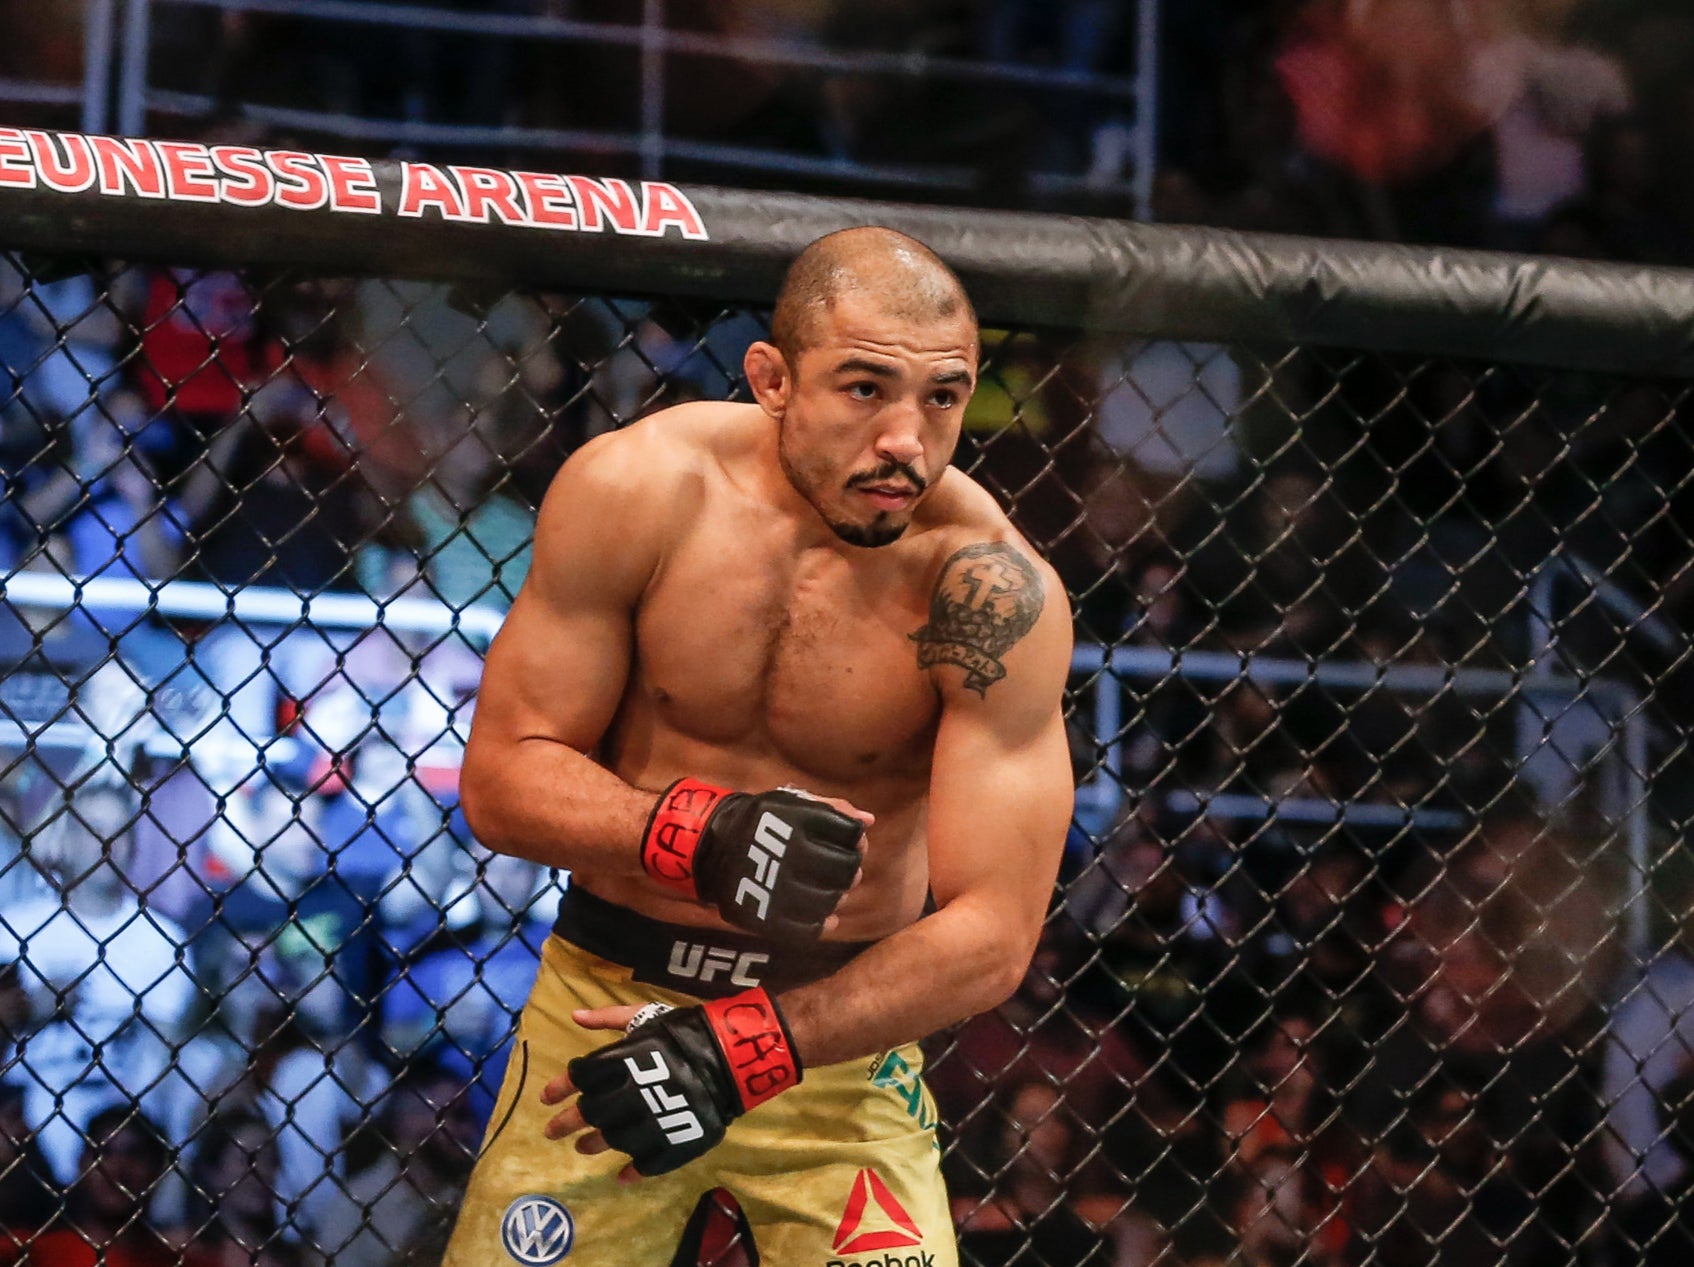 Jose Aldo has rejuvenated his career at bantamweight but was featherweight king for years